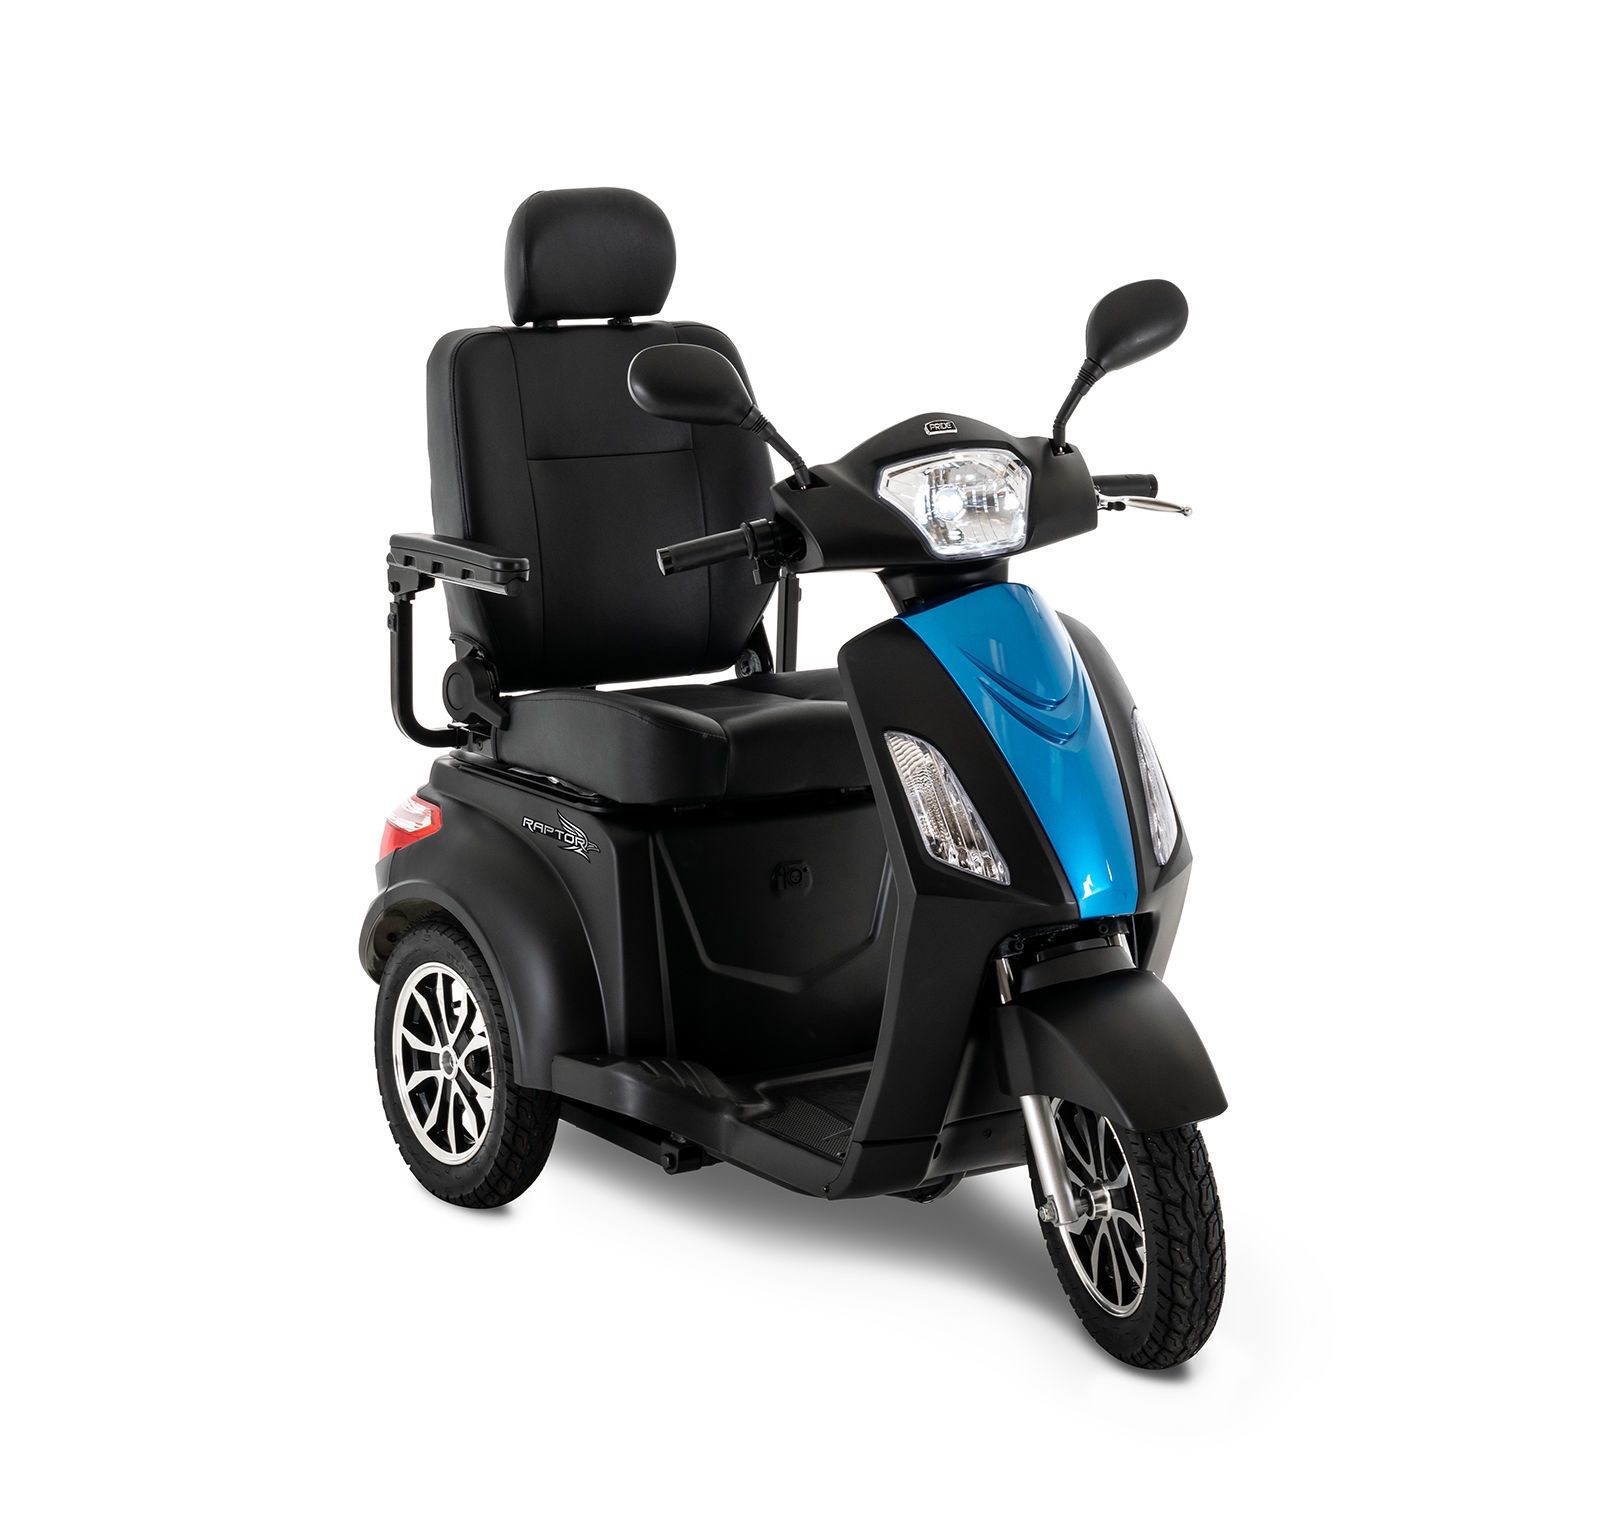 Brand New mobility scooter - Deeply Discounted Price